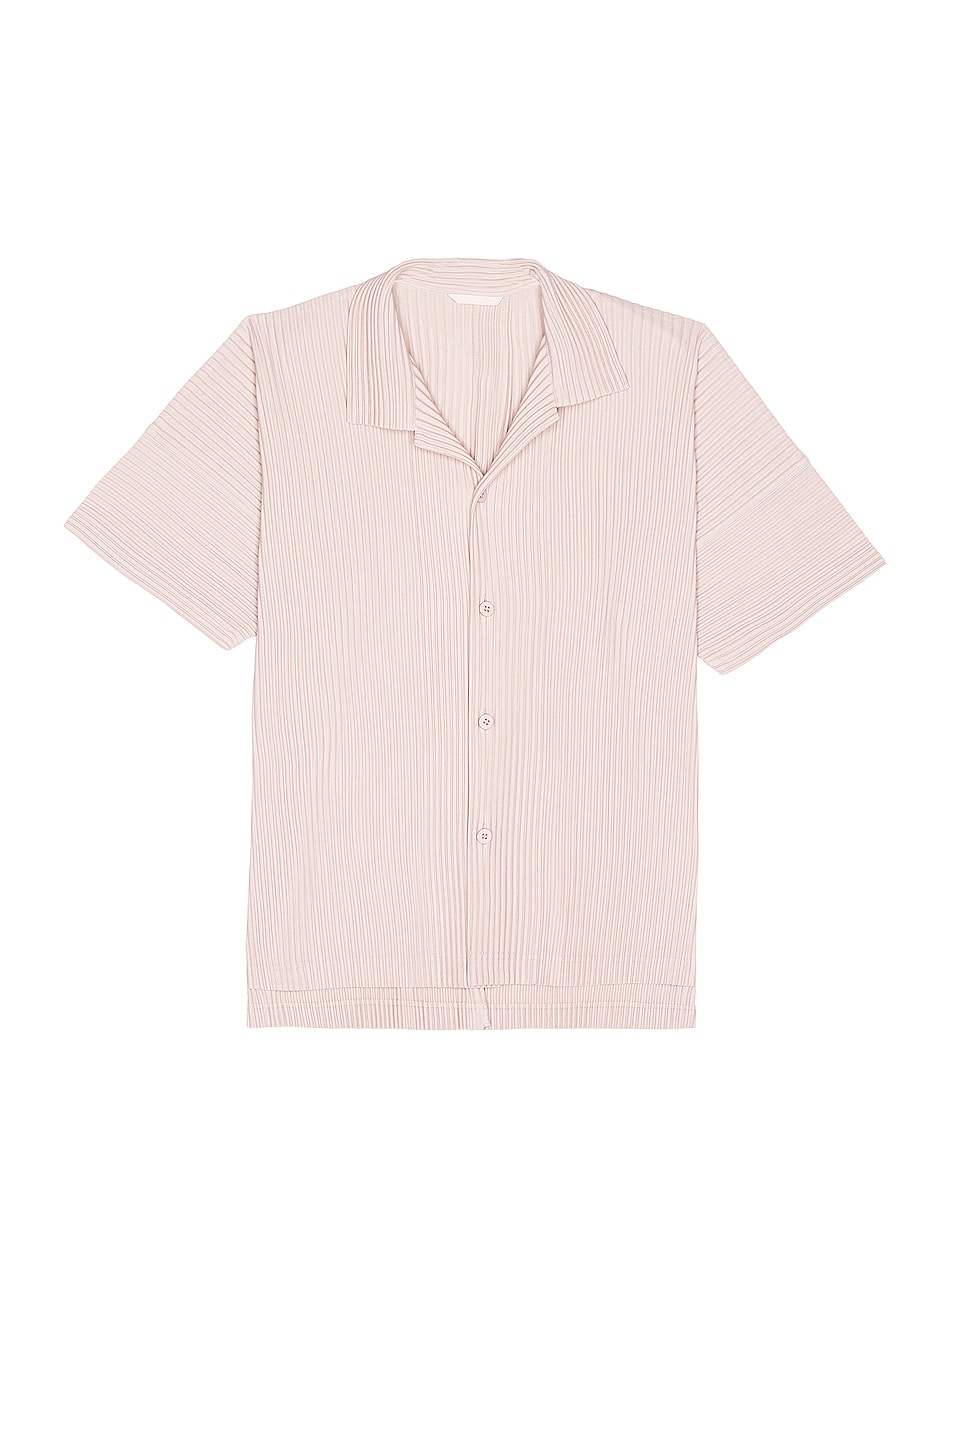 Image 1 of Homme Plisse Issey Miyake Shirt in Cherry Blossom Pink